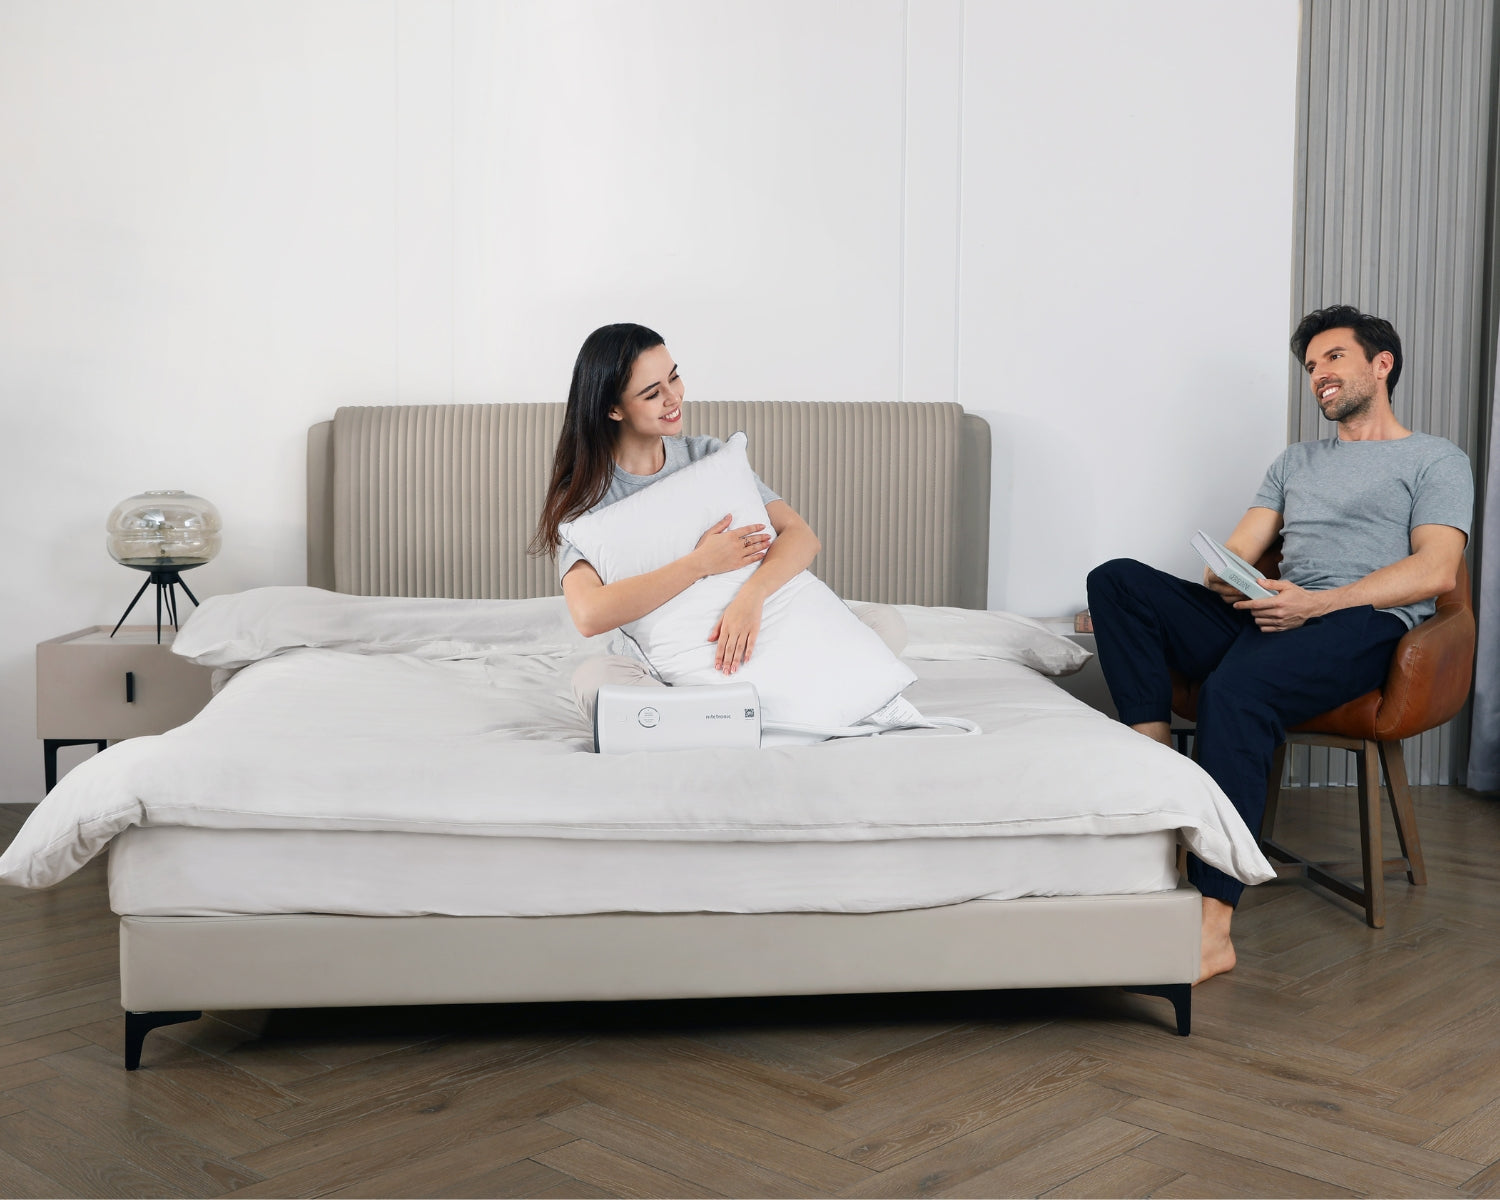 Introducing Snoring: Causes, Solutions, and the Nitetronic Z6 Snore-Reducing Pillow